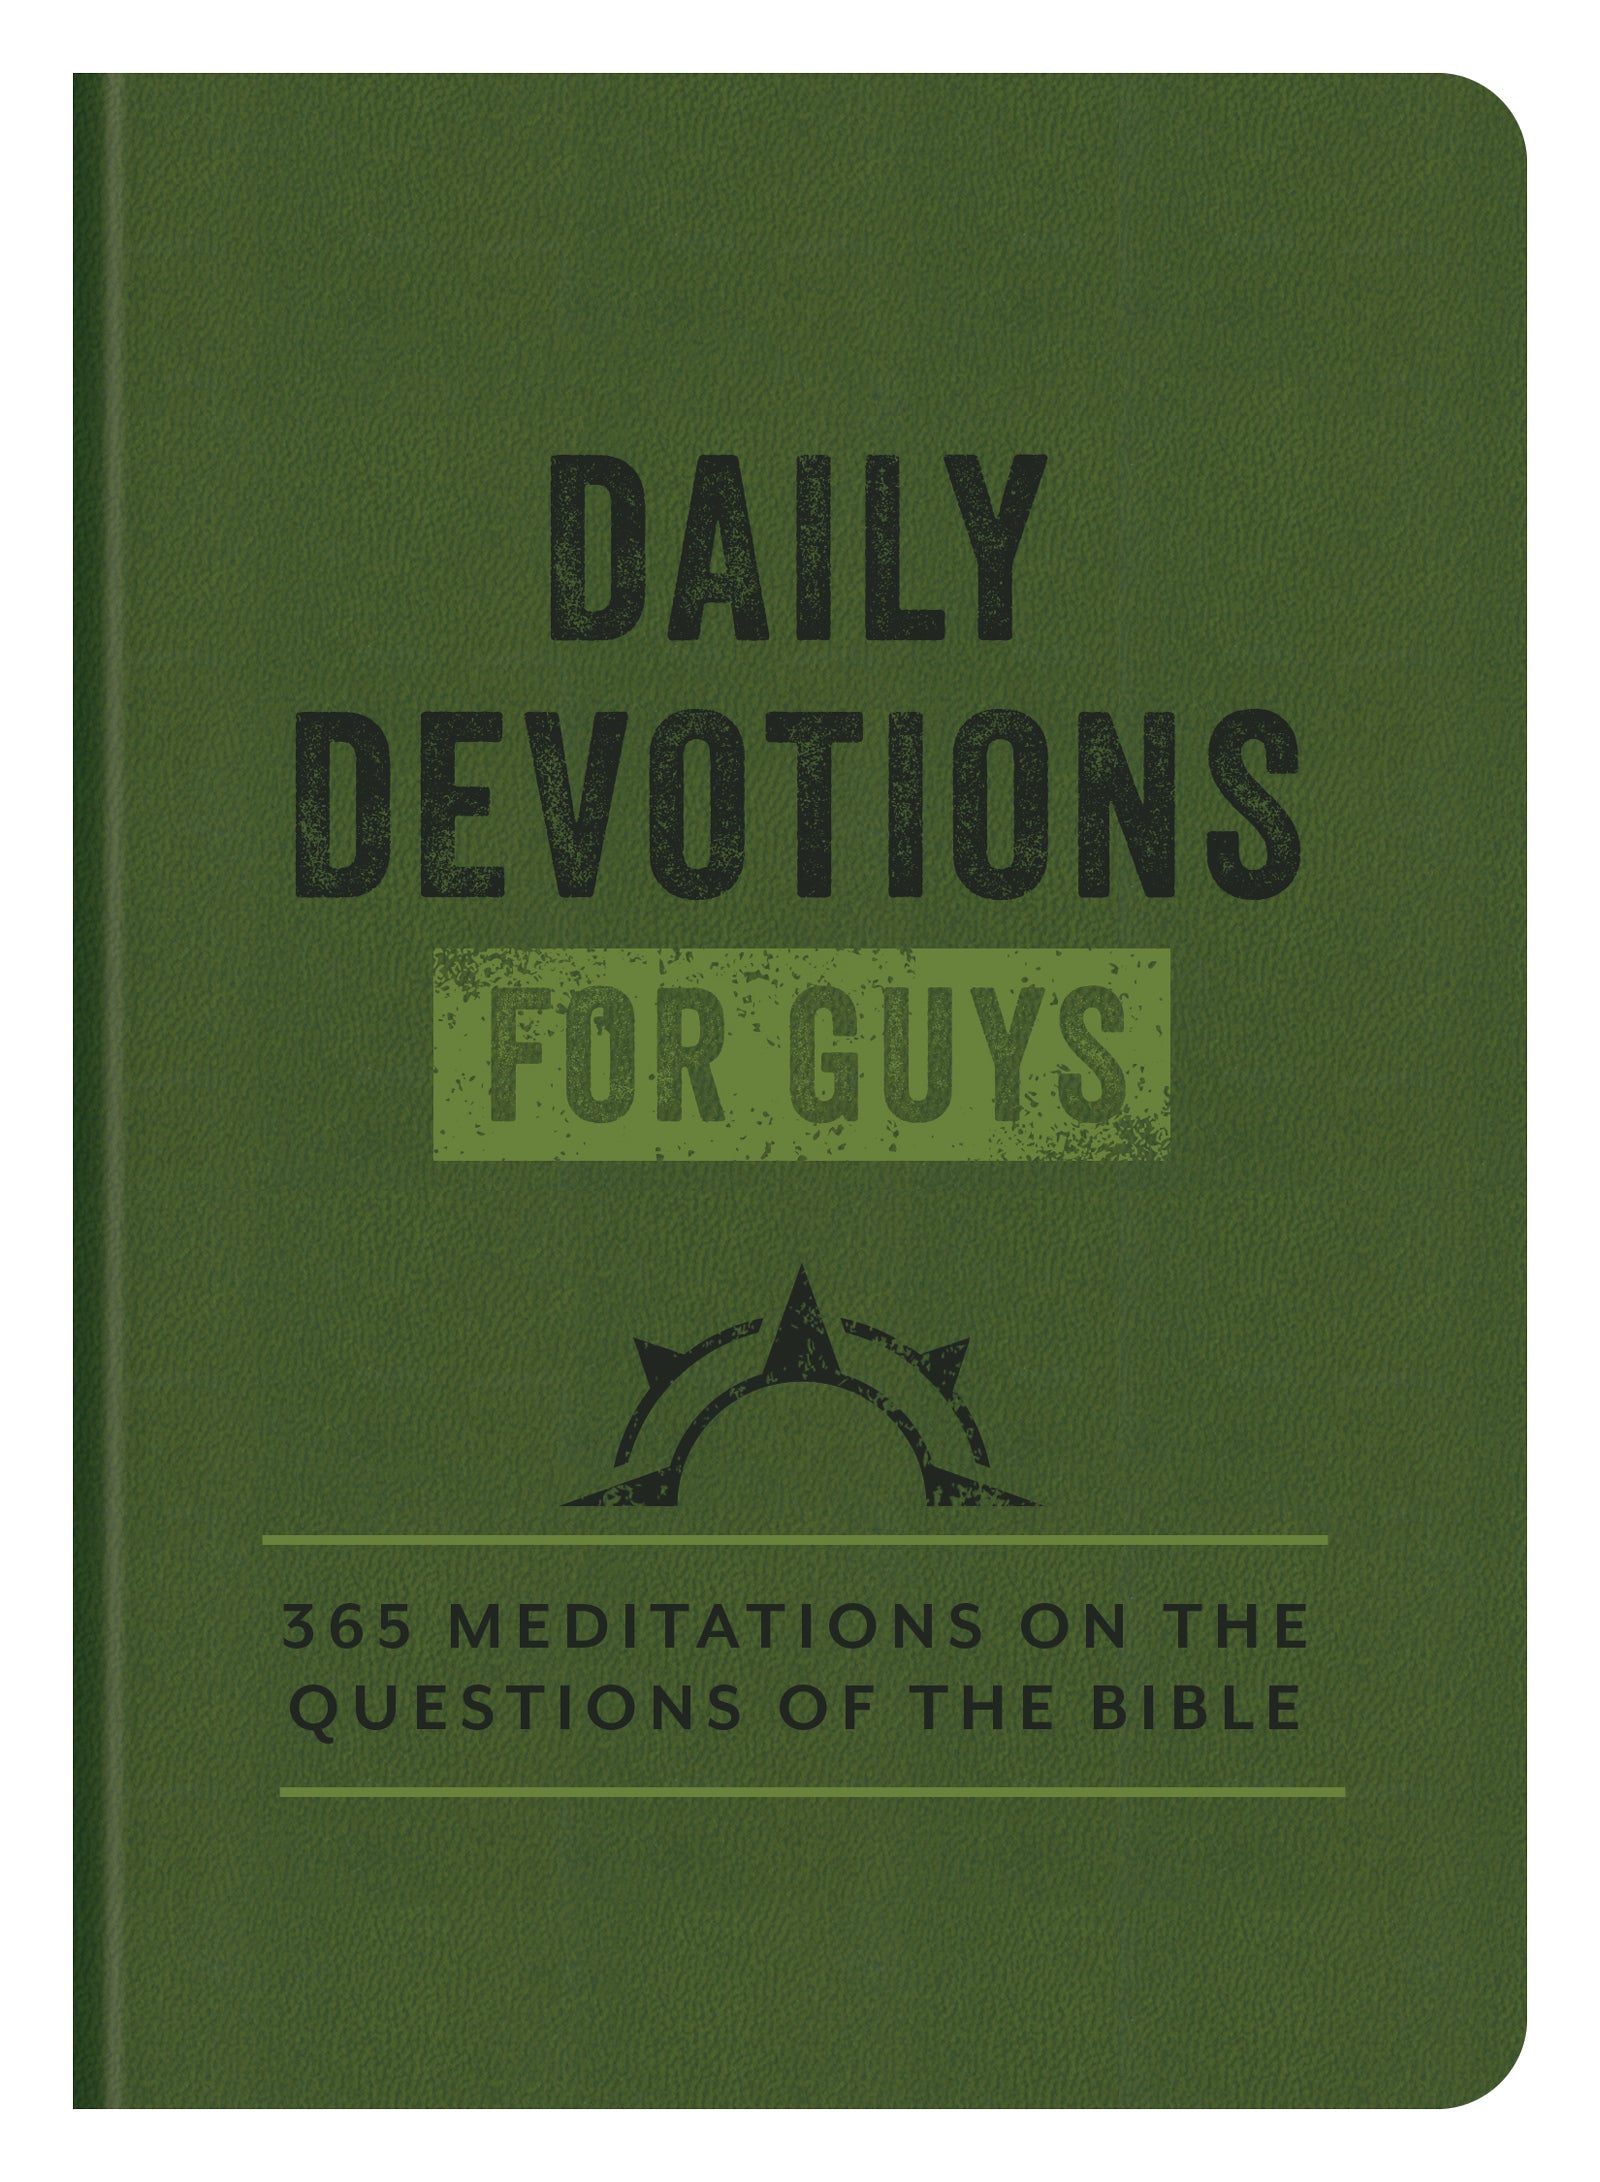 Daily Devotions for Guys - Mercantile Mountain